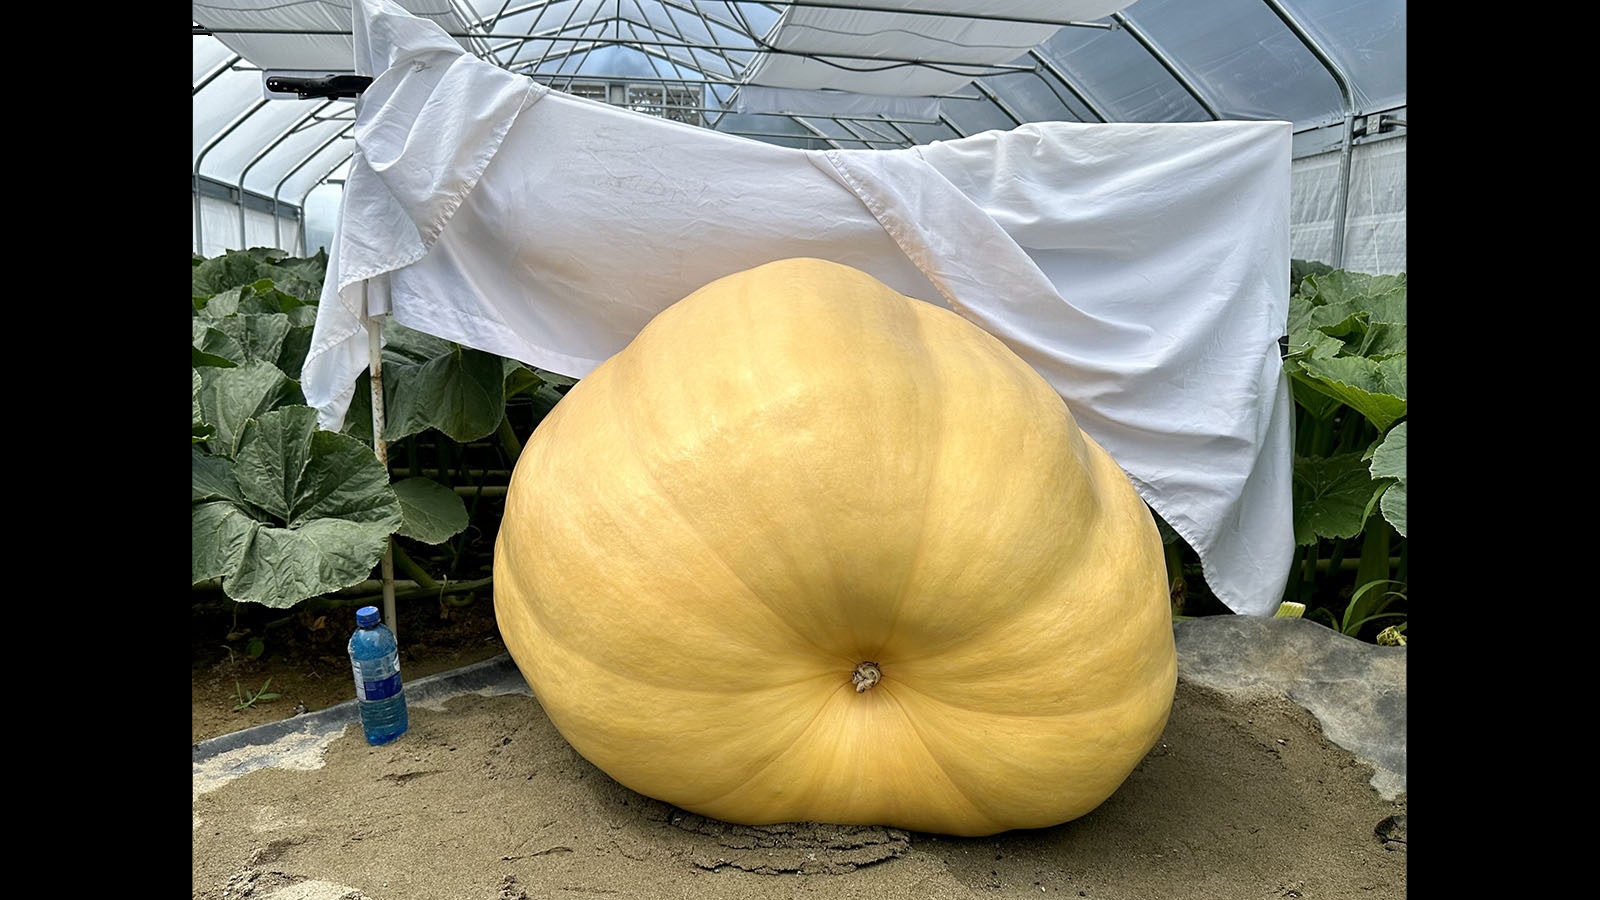 "Joanie Cunnigham" is the smaller of two pumpkins in the greenhouse. The blankets keep the sun off the pumpkin's surface, keeping it soft so water can keep filtering in.